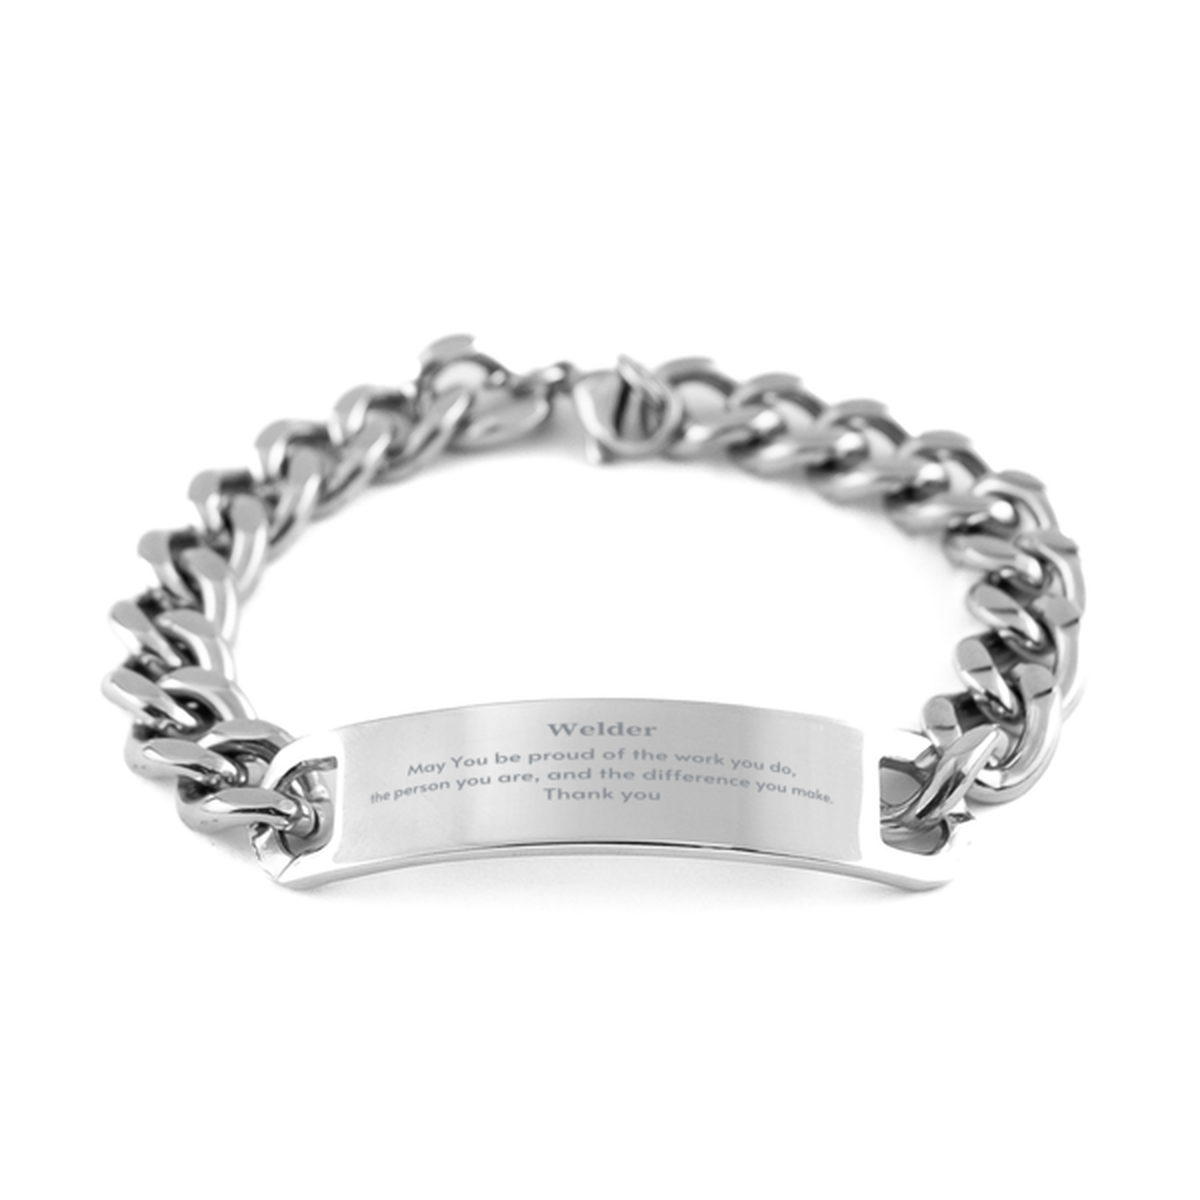 Heartwarming Cuban Chain Stainless Steel Bracelet Retirement Coworkers Gifts for Welder, Welder May You be proud of the work you do, the person you are Gifts for Boss Men Women Friends